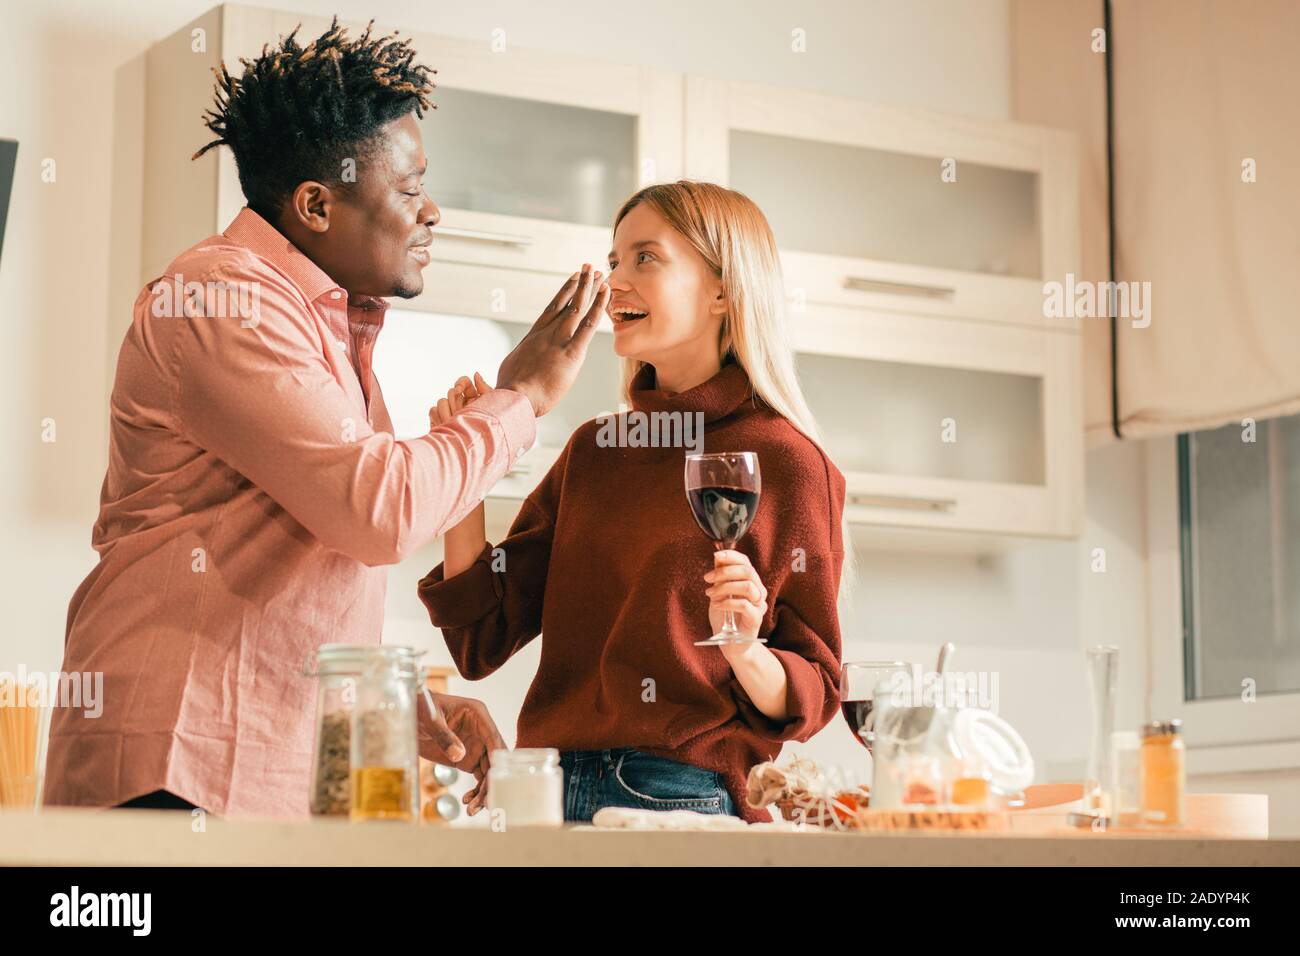 Careful man putting flour spot on the nose of laughing lady Stock Photo